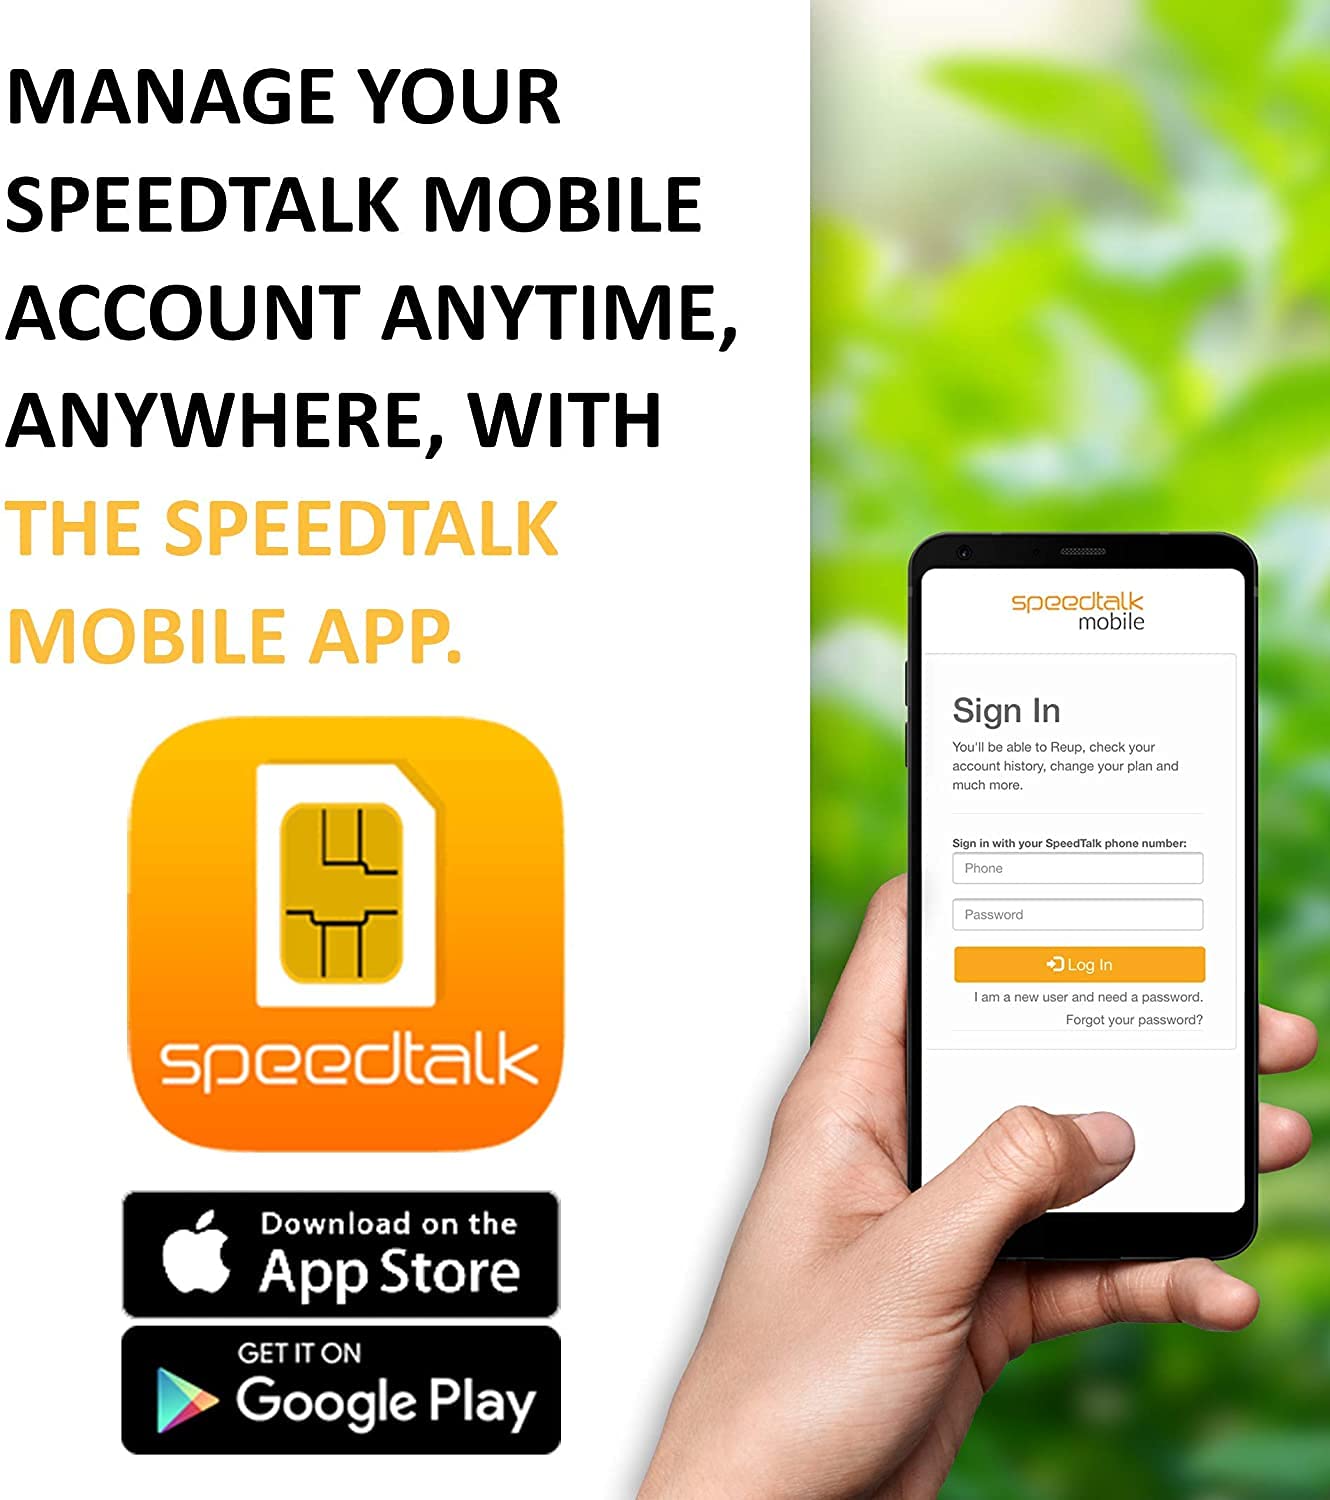 $5/Month SpeedTalk Mobile Prepaid SIM Card - Monthly 250 Minutes Talk OR 250 SMS Text OR 250MB Data No Contract 12 Months Smart Phone Plan